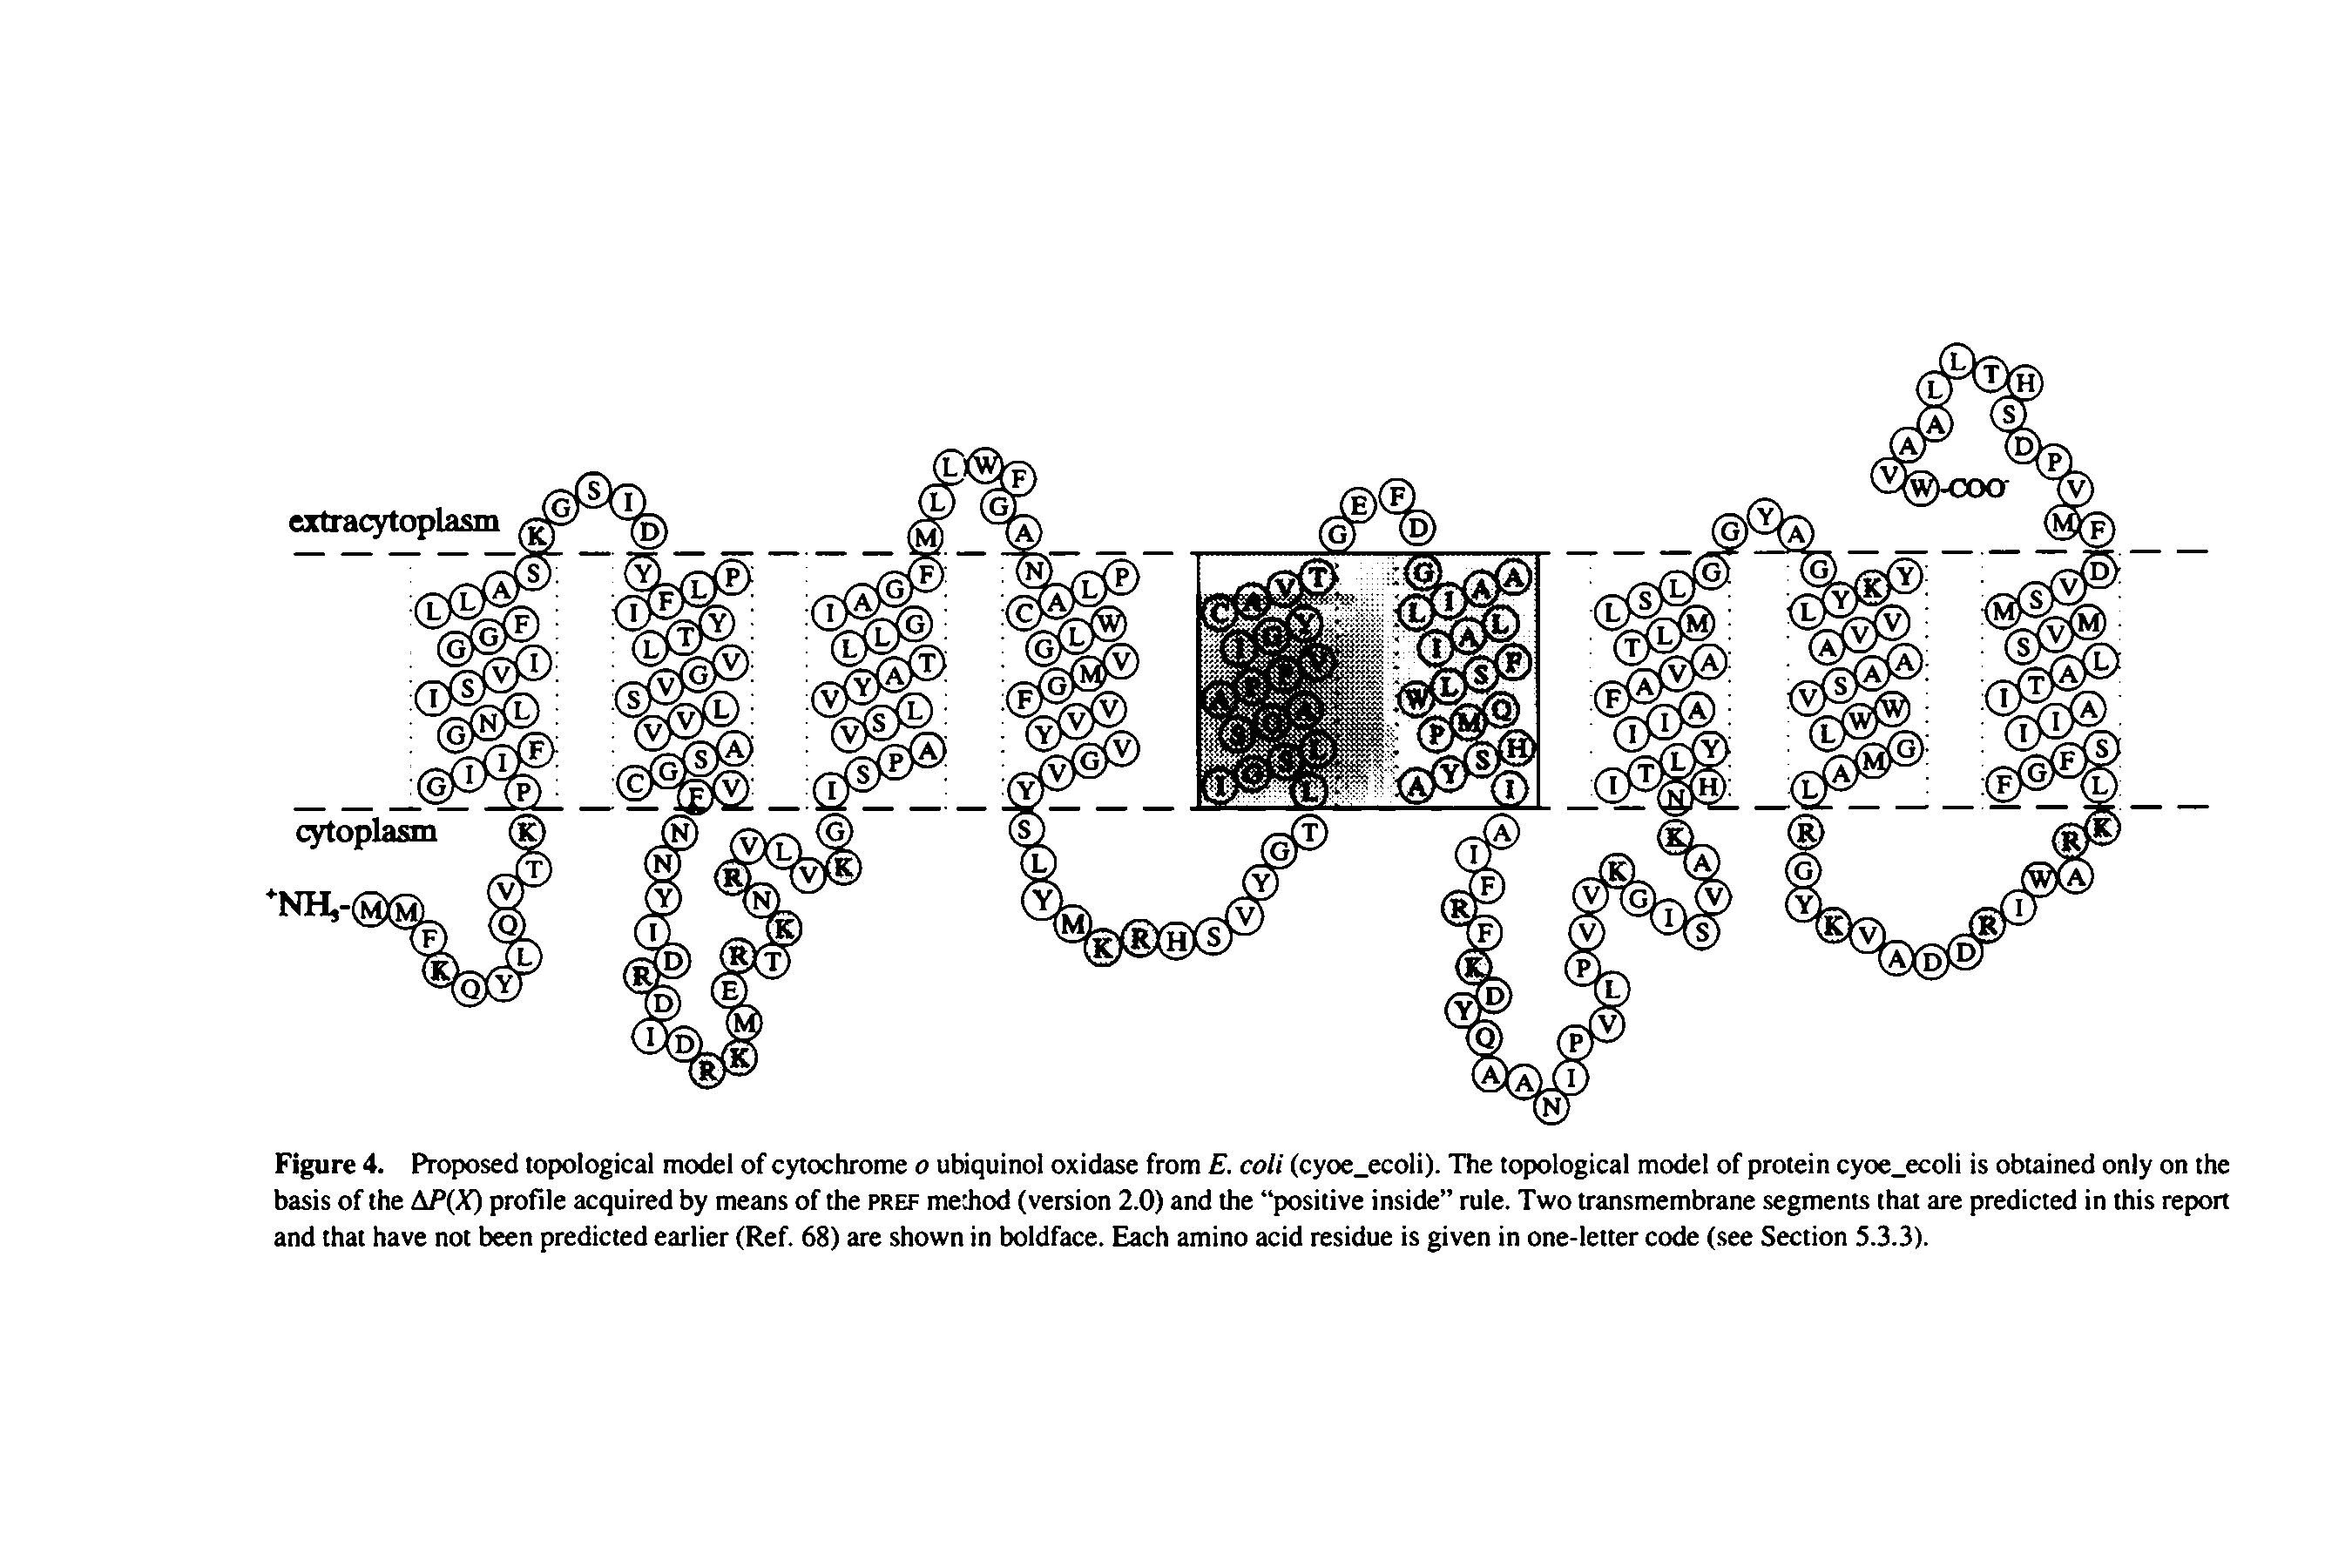 Figure 4. Proposed topological model of cytochrome o ubiquinol oxidase from E. coli (cyoe ecoli). The topological model of protein cyoe ecoli is obtained only on the basis of the AP(X) profile acquired by means of the pref mediod (version 2.0) and the positive inside rule. Two transmembrane segments that are predicted in this report and that have not been predicted earlier (Ref. 68) are shown in boldface. Each amino acid residue is given in one-letter code (.see Section 5.3.3).